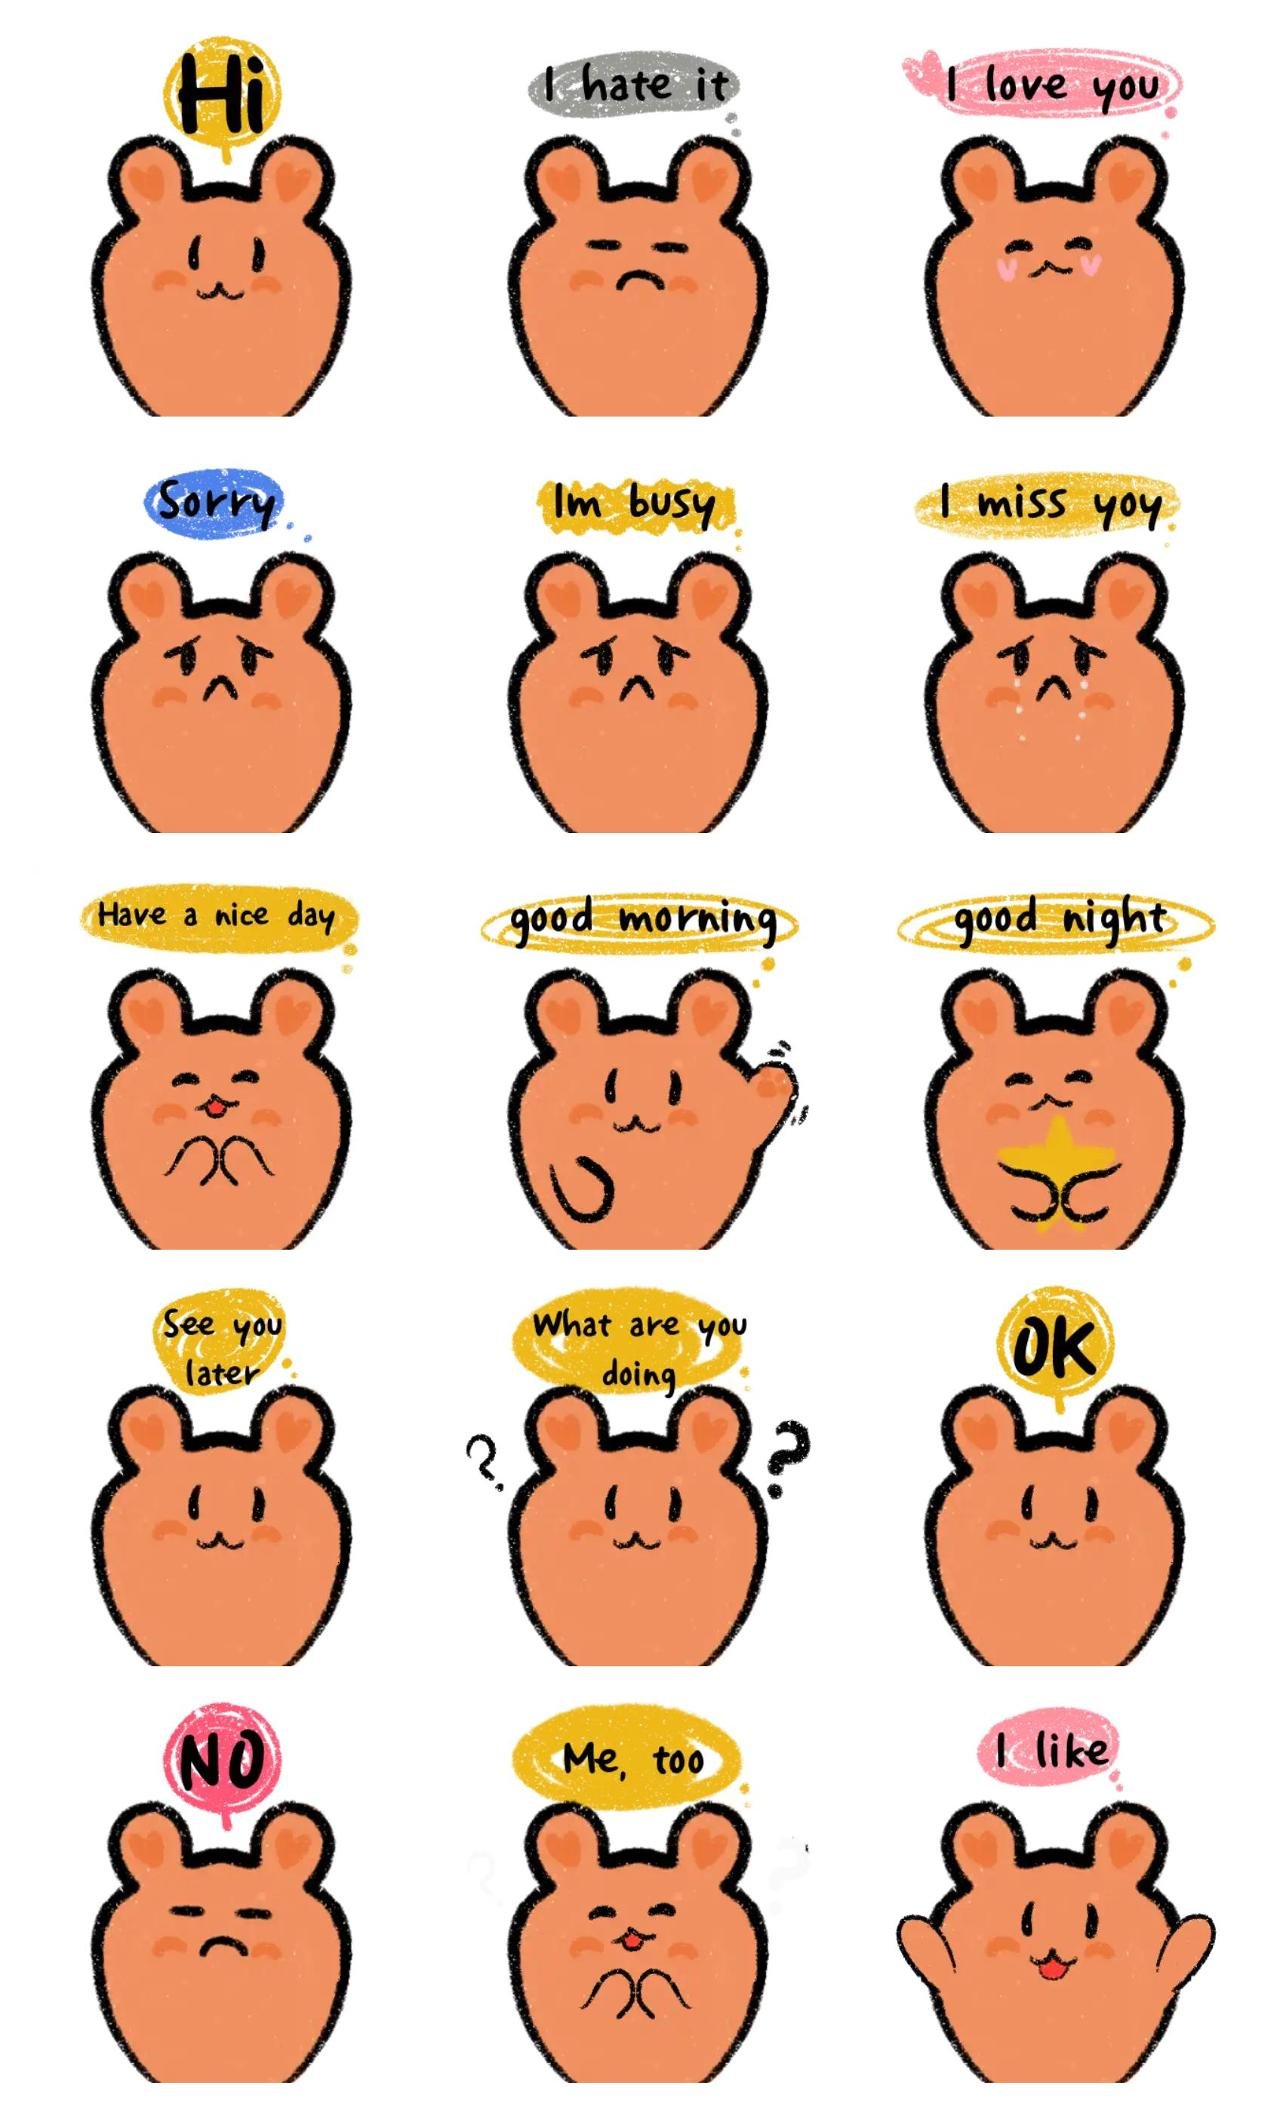 Daily life of a cute bear Animals,Celebrity sticker pack for Whatsapp, Telegram, Signal, and others chatting and message apps